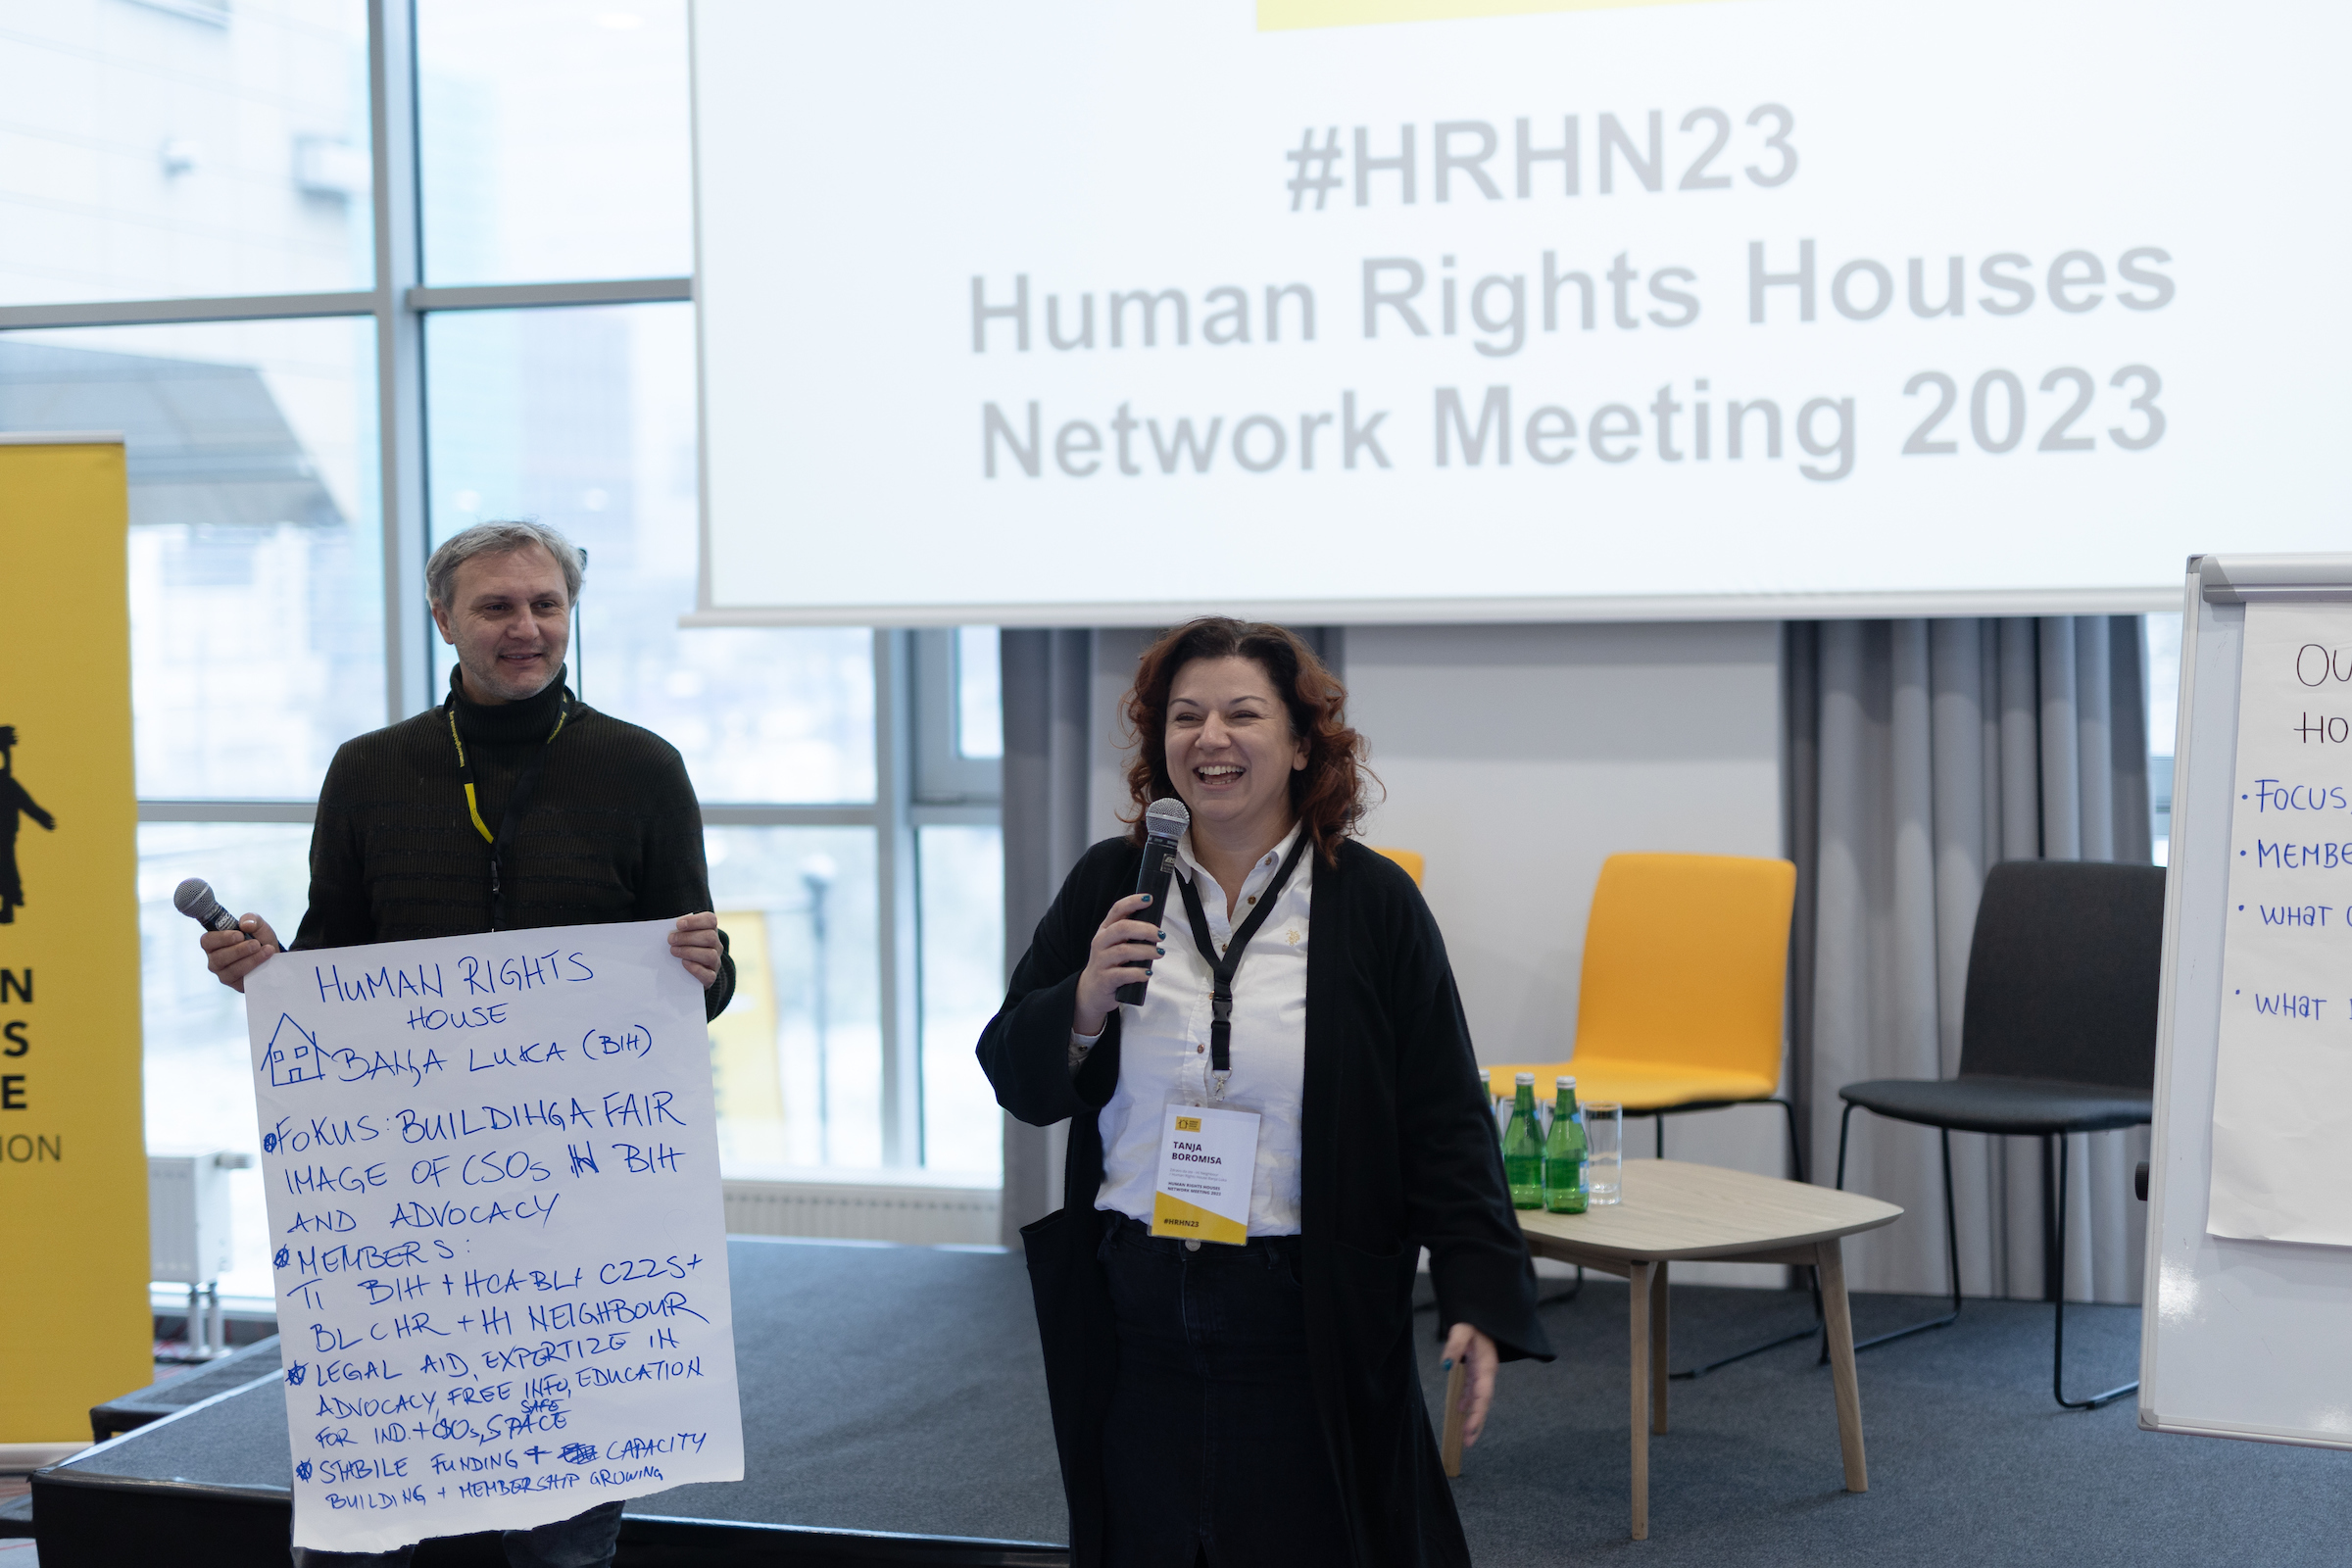 Tanja Boromisa is joined by Ratko Pilipović from Center for the Environment, as they present Human Rights House Banja Luka to their new colleagues at the Human Rights Houses Network Meeting 2023. 